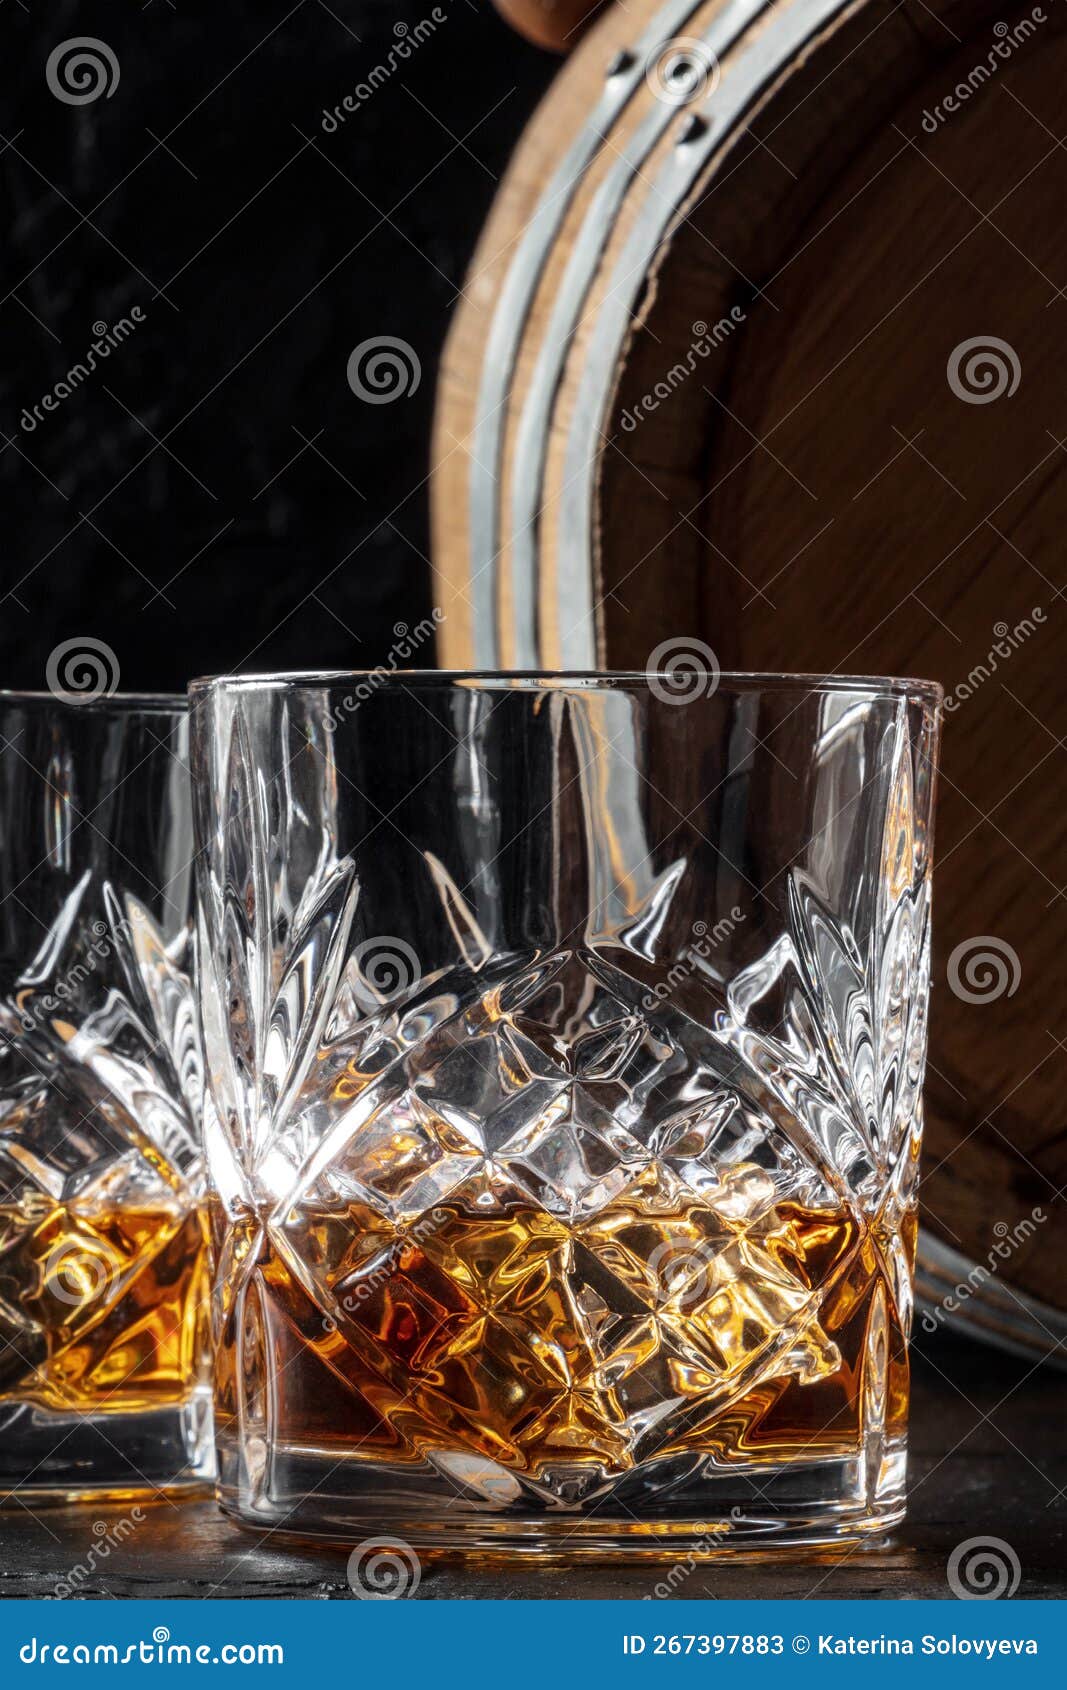 whiskey in a glass with a barrel. bourbon whisky and a cask on a dark background